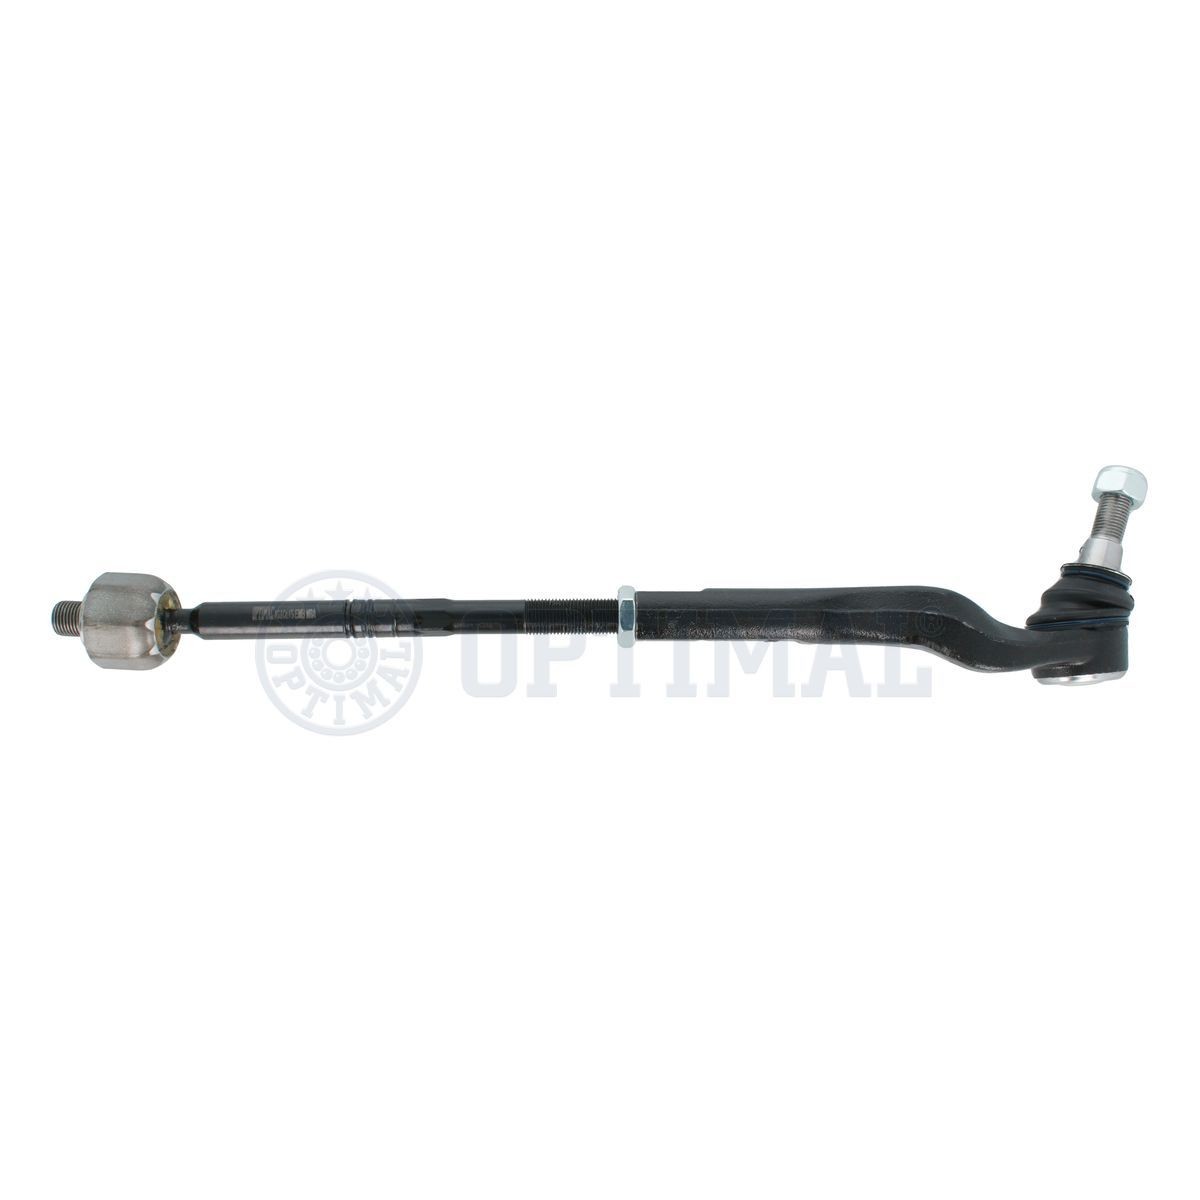 OPTIMAL Steering bar G0-817 suitable for MERCEDES-BENZ V-Class, VITO